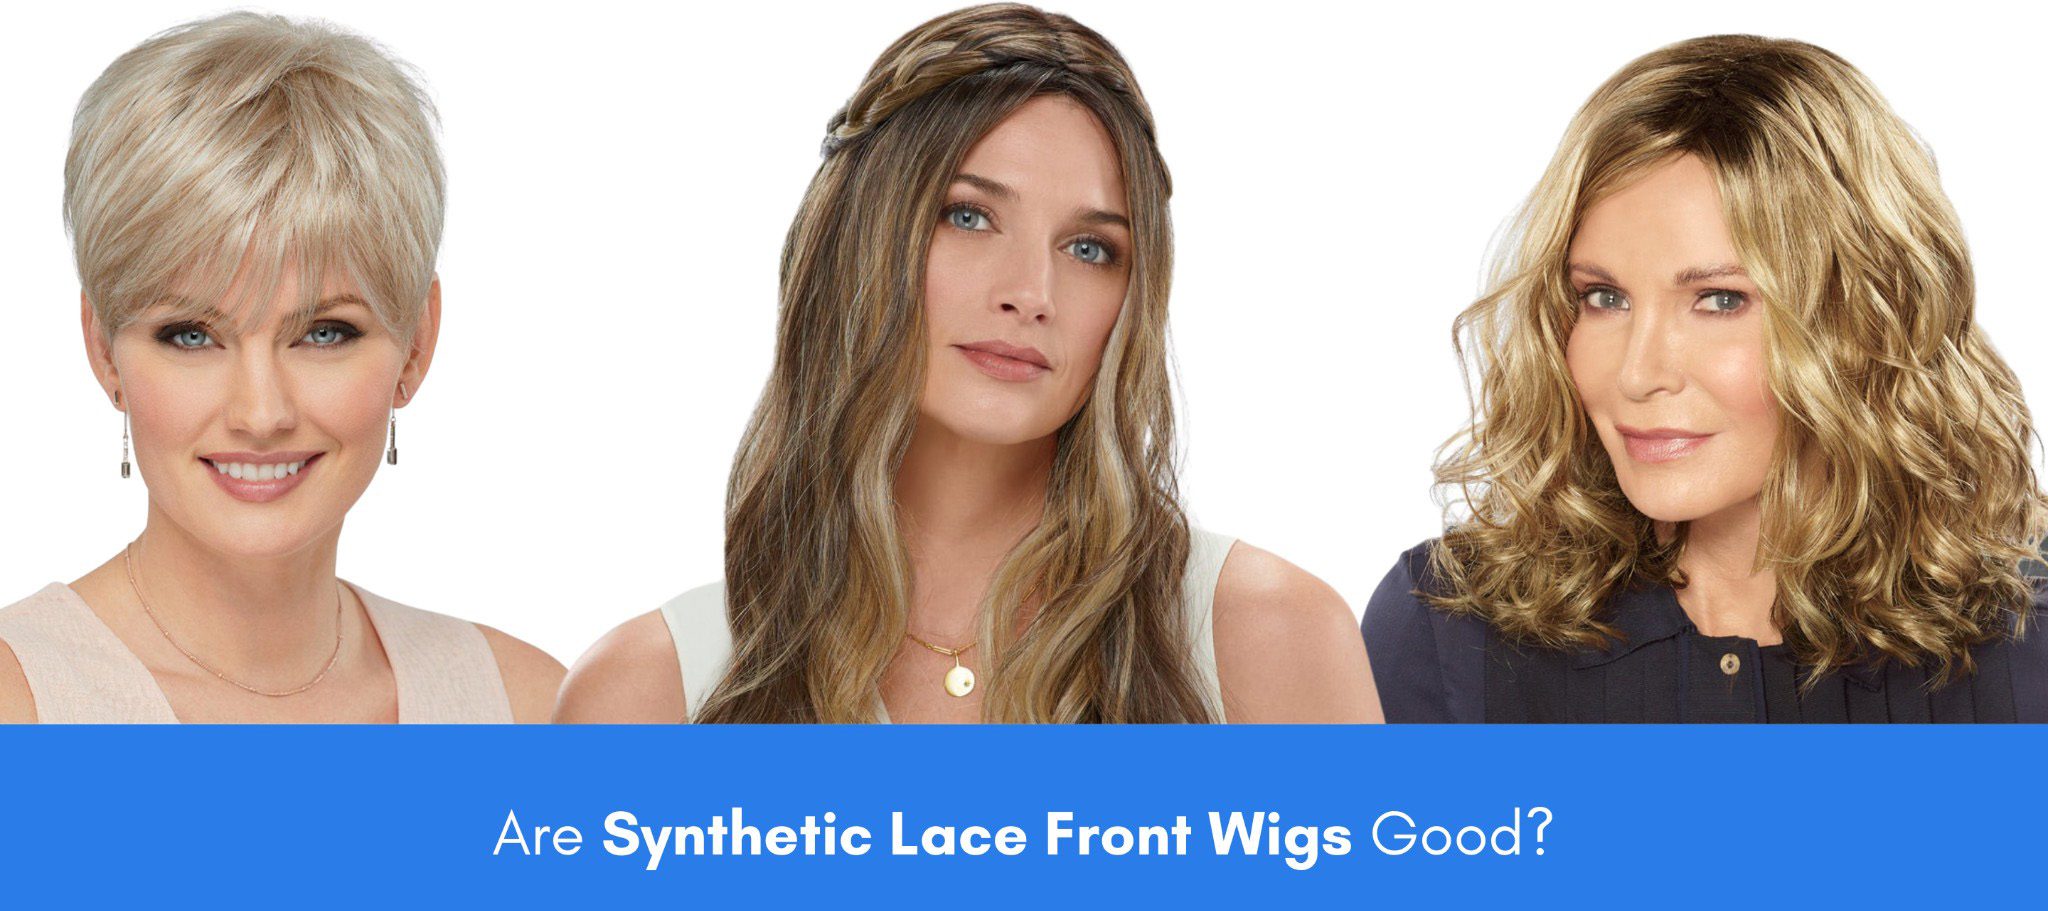 Are Synthetic Lace Front Wigs Good?